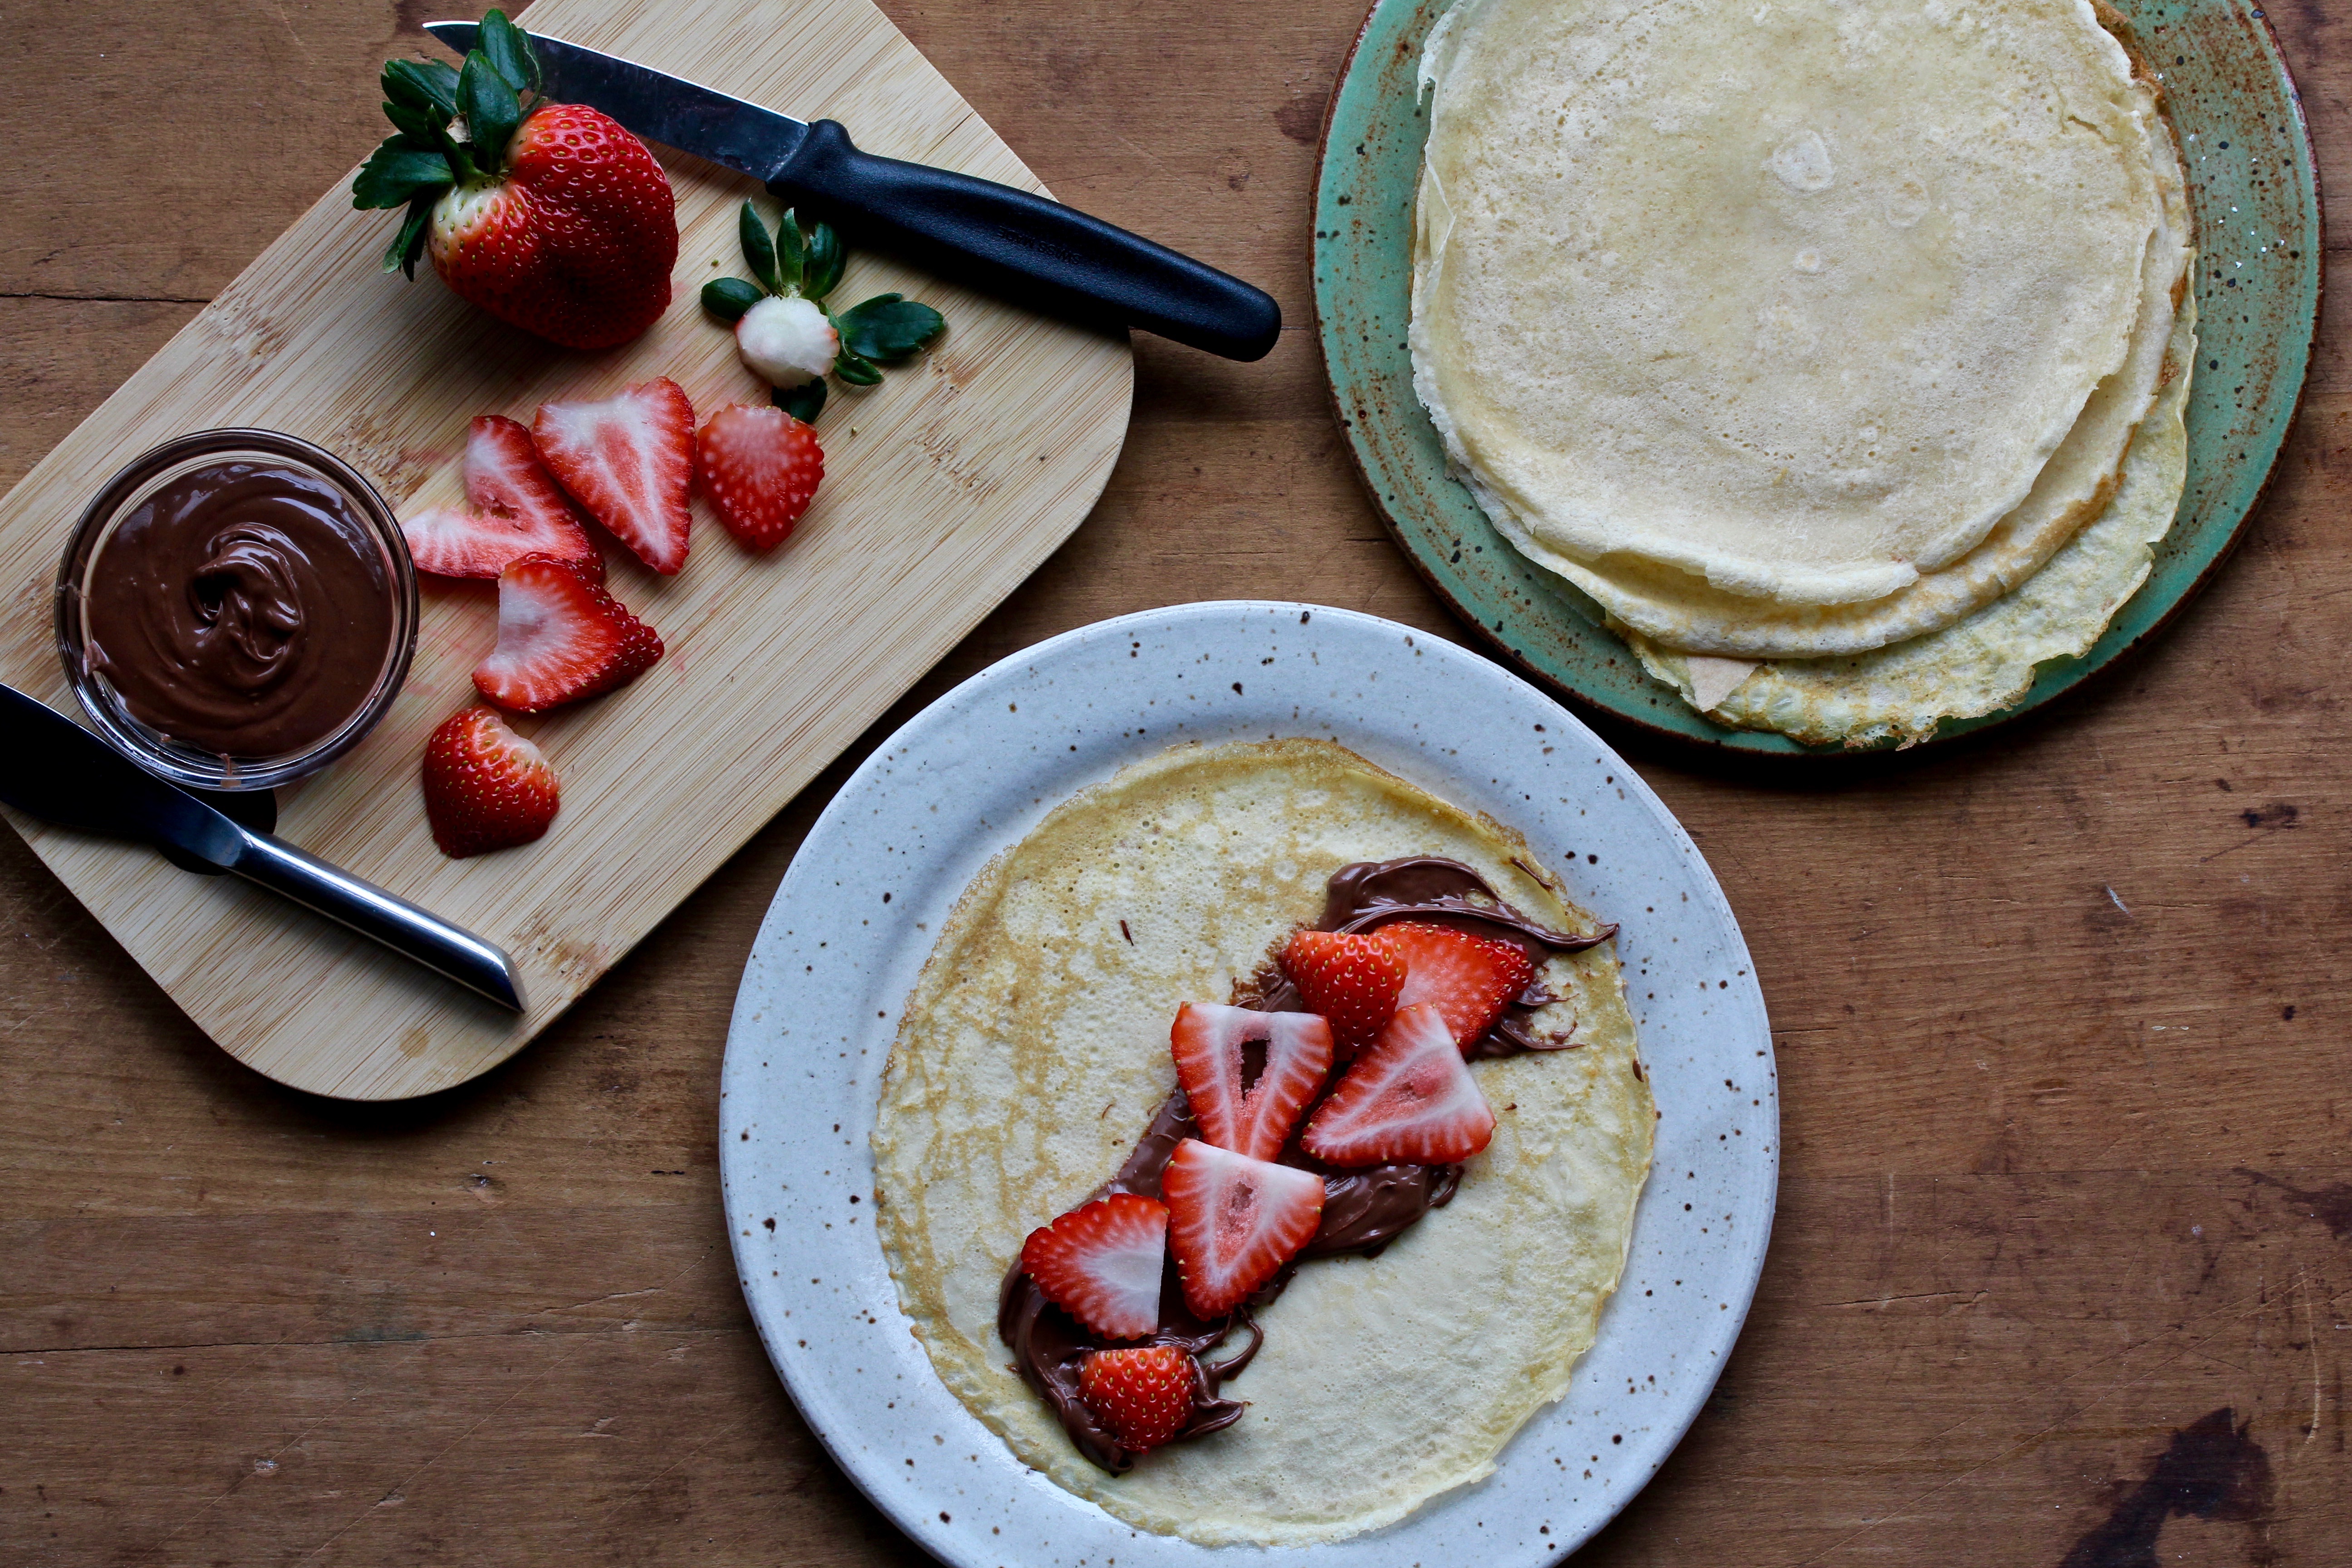 Sweet Simple Crepes